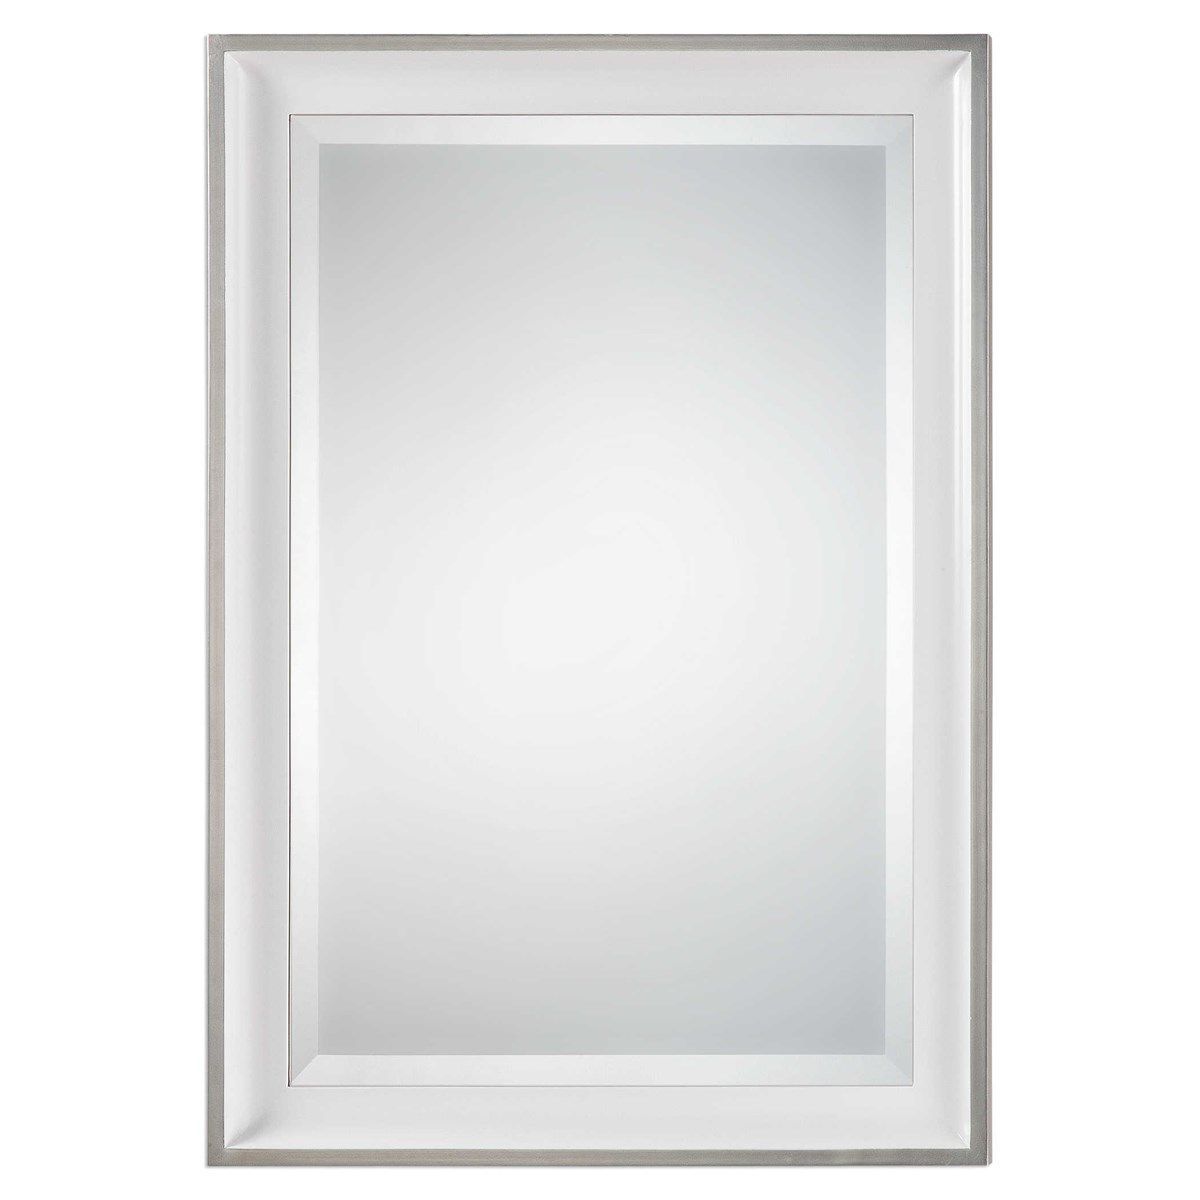 Gloss White With Silver Leaf Edge Vanity Mirror – On Backorder Until Regarding Glossy Blue Wall Mirrors (View 12 of 15)